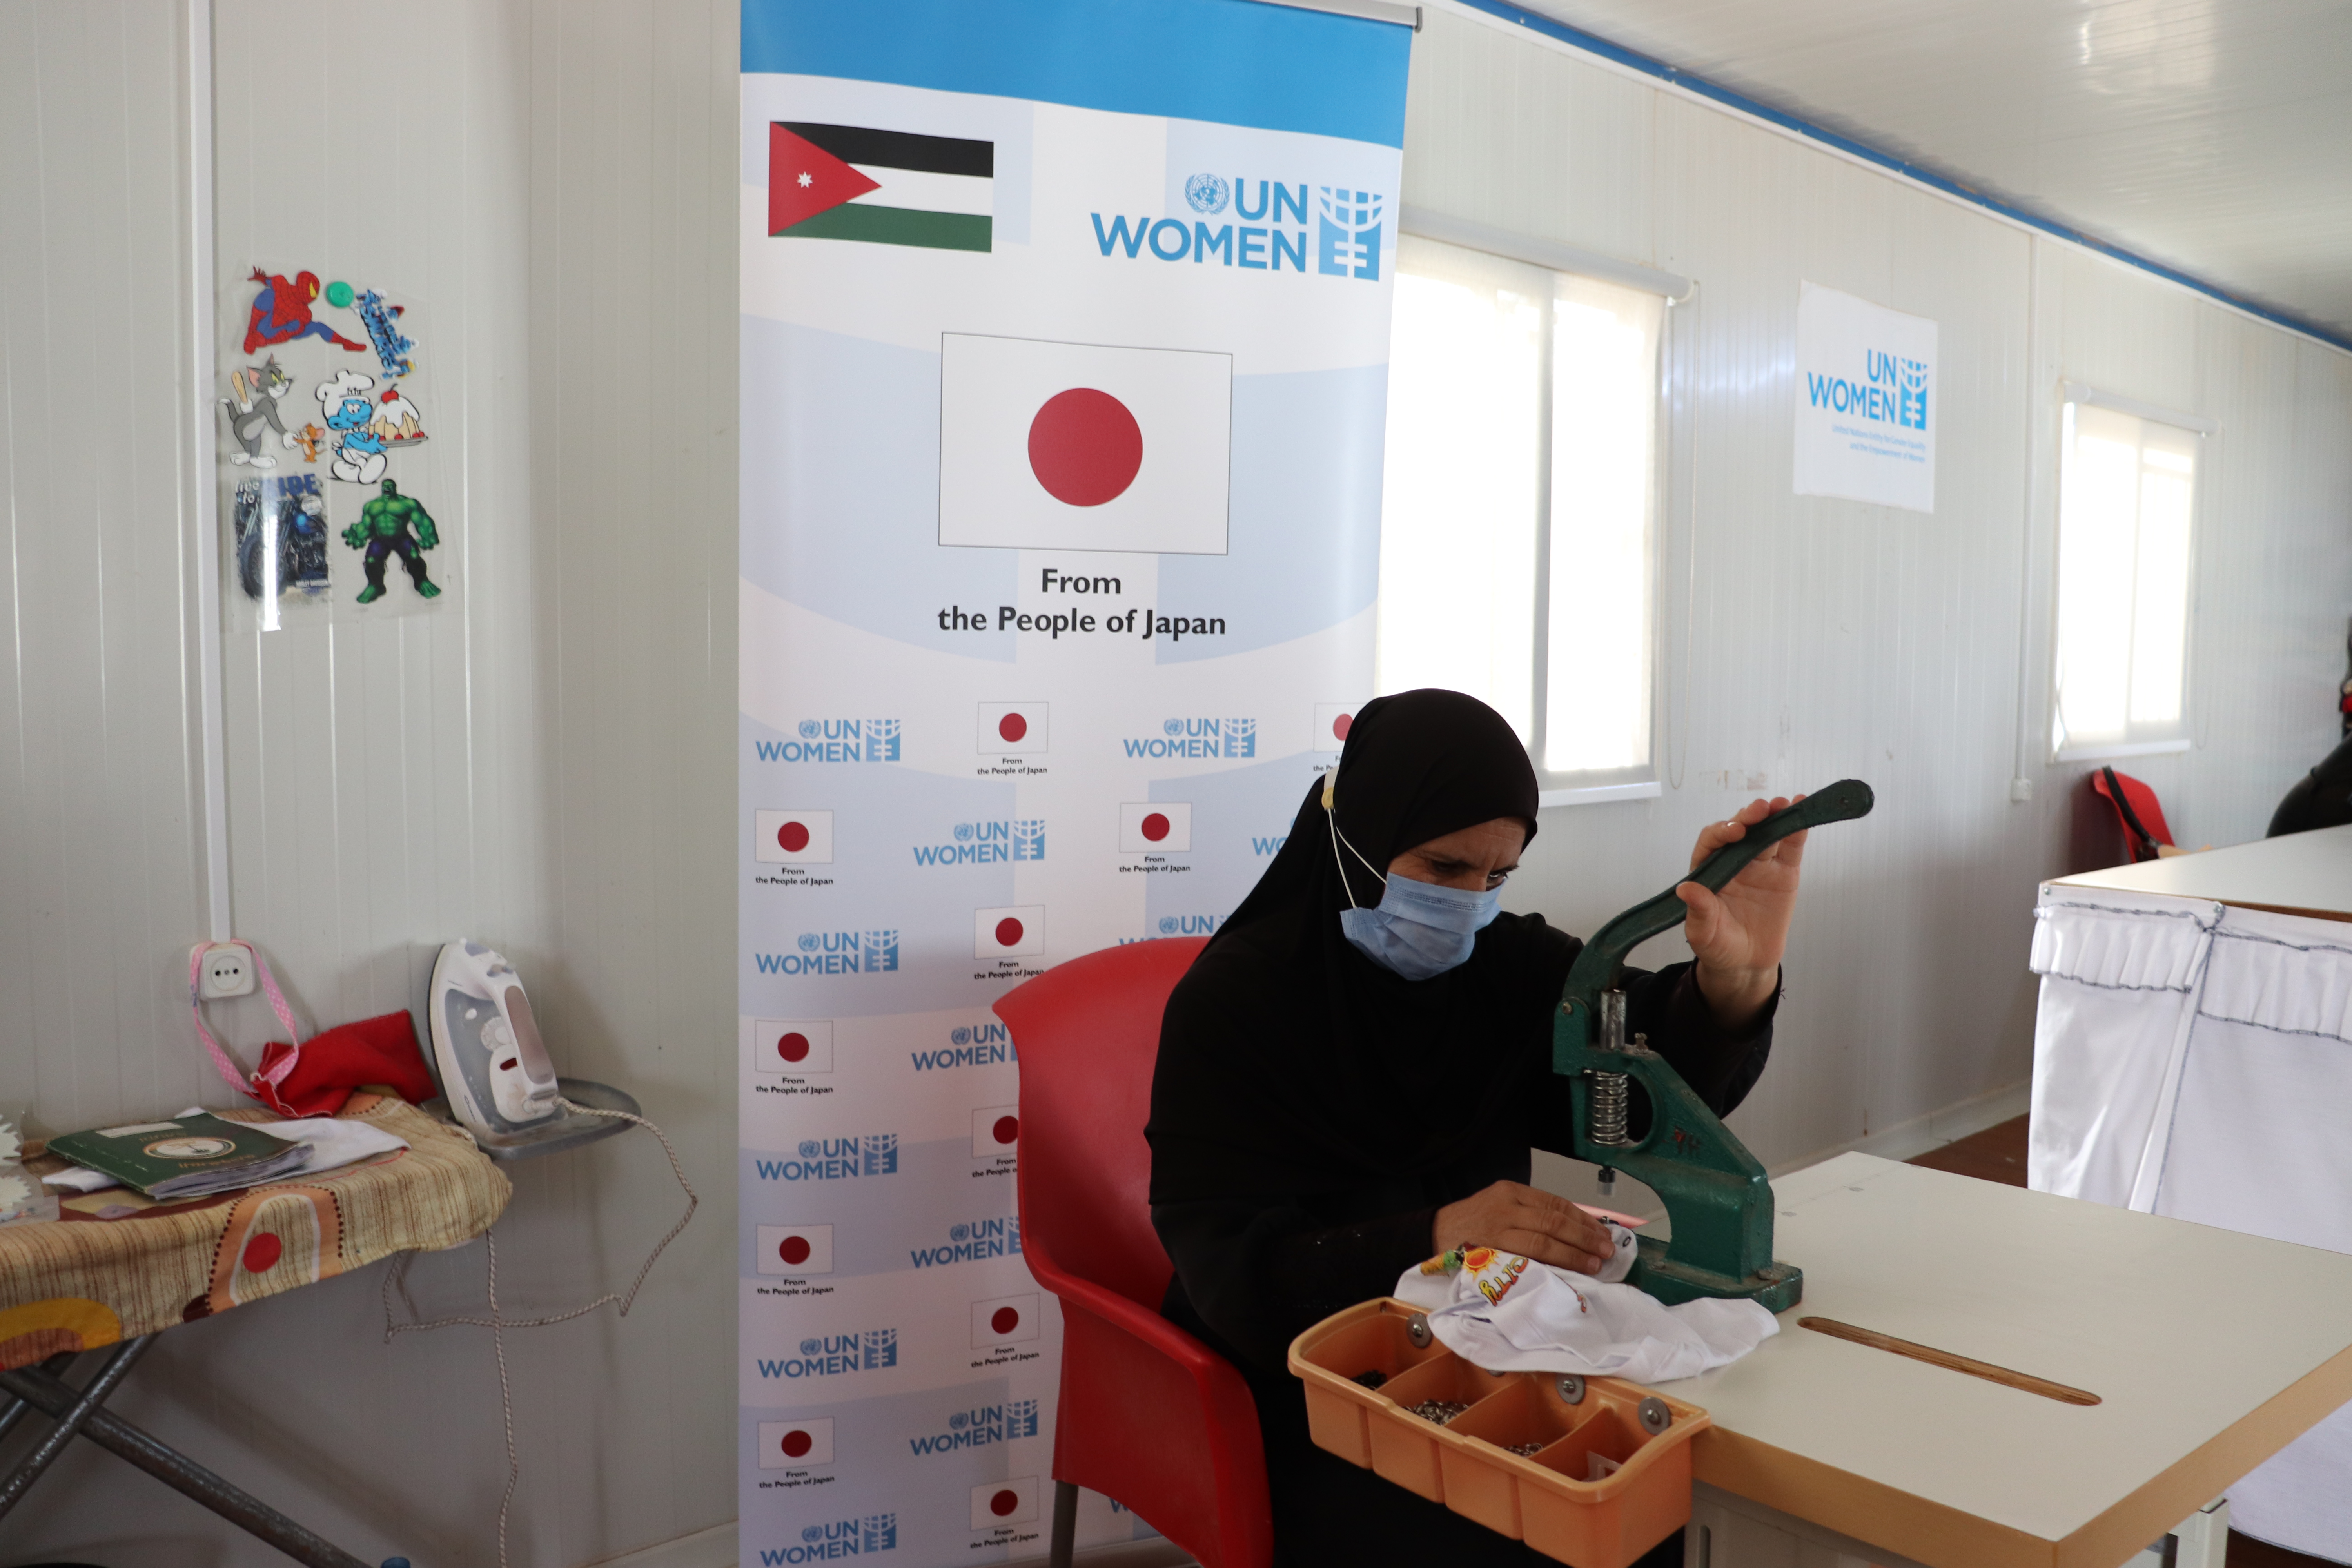 Fatoom Mohammad Suwwan, 51, has found an incentive-based volunteer opportunity as a cutter in tailoring at the UN Women Oasis Centre in Azraq refugee camp. Photo: UN Women/Ye Ji Lee